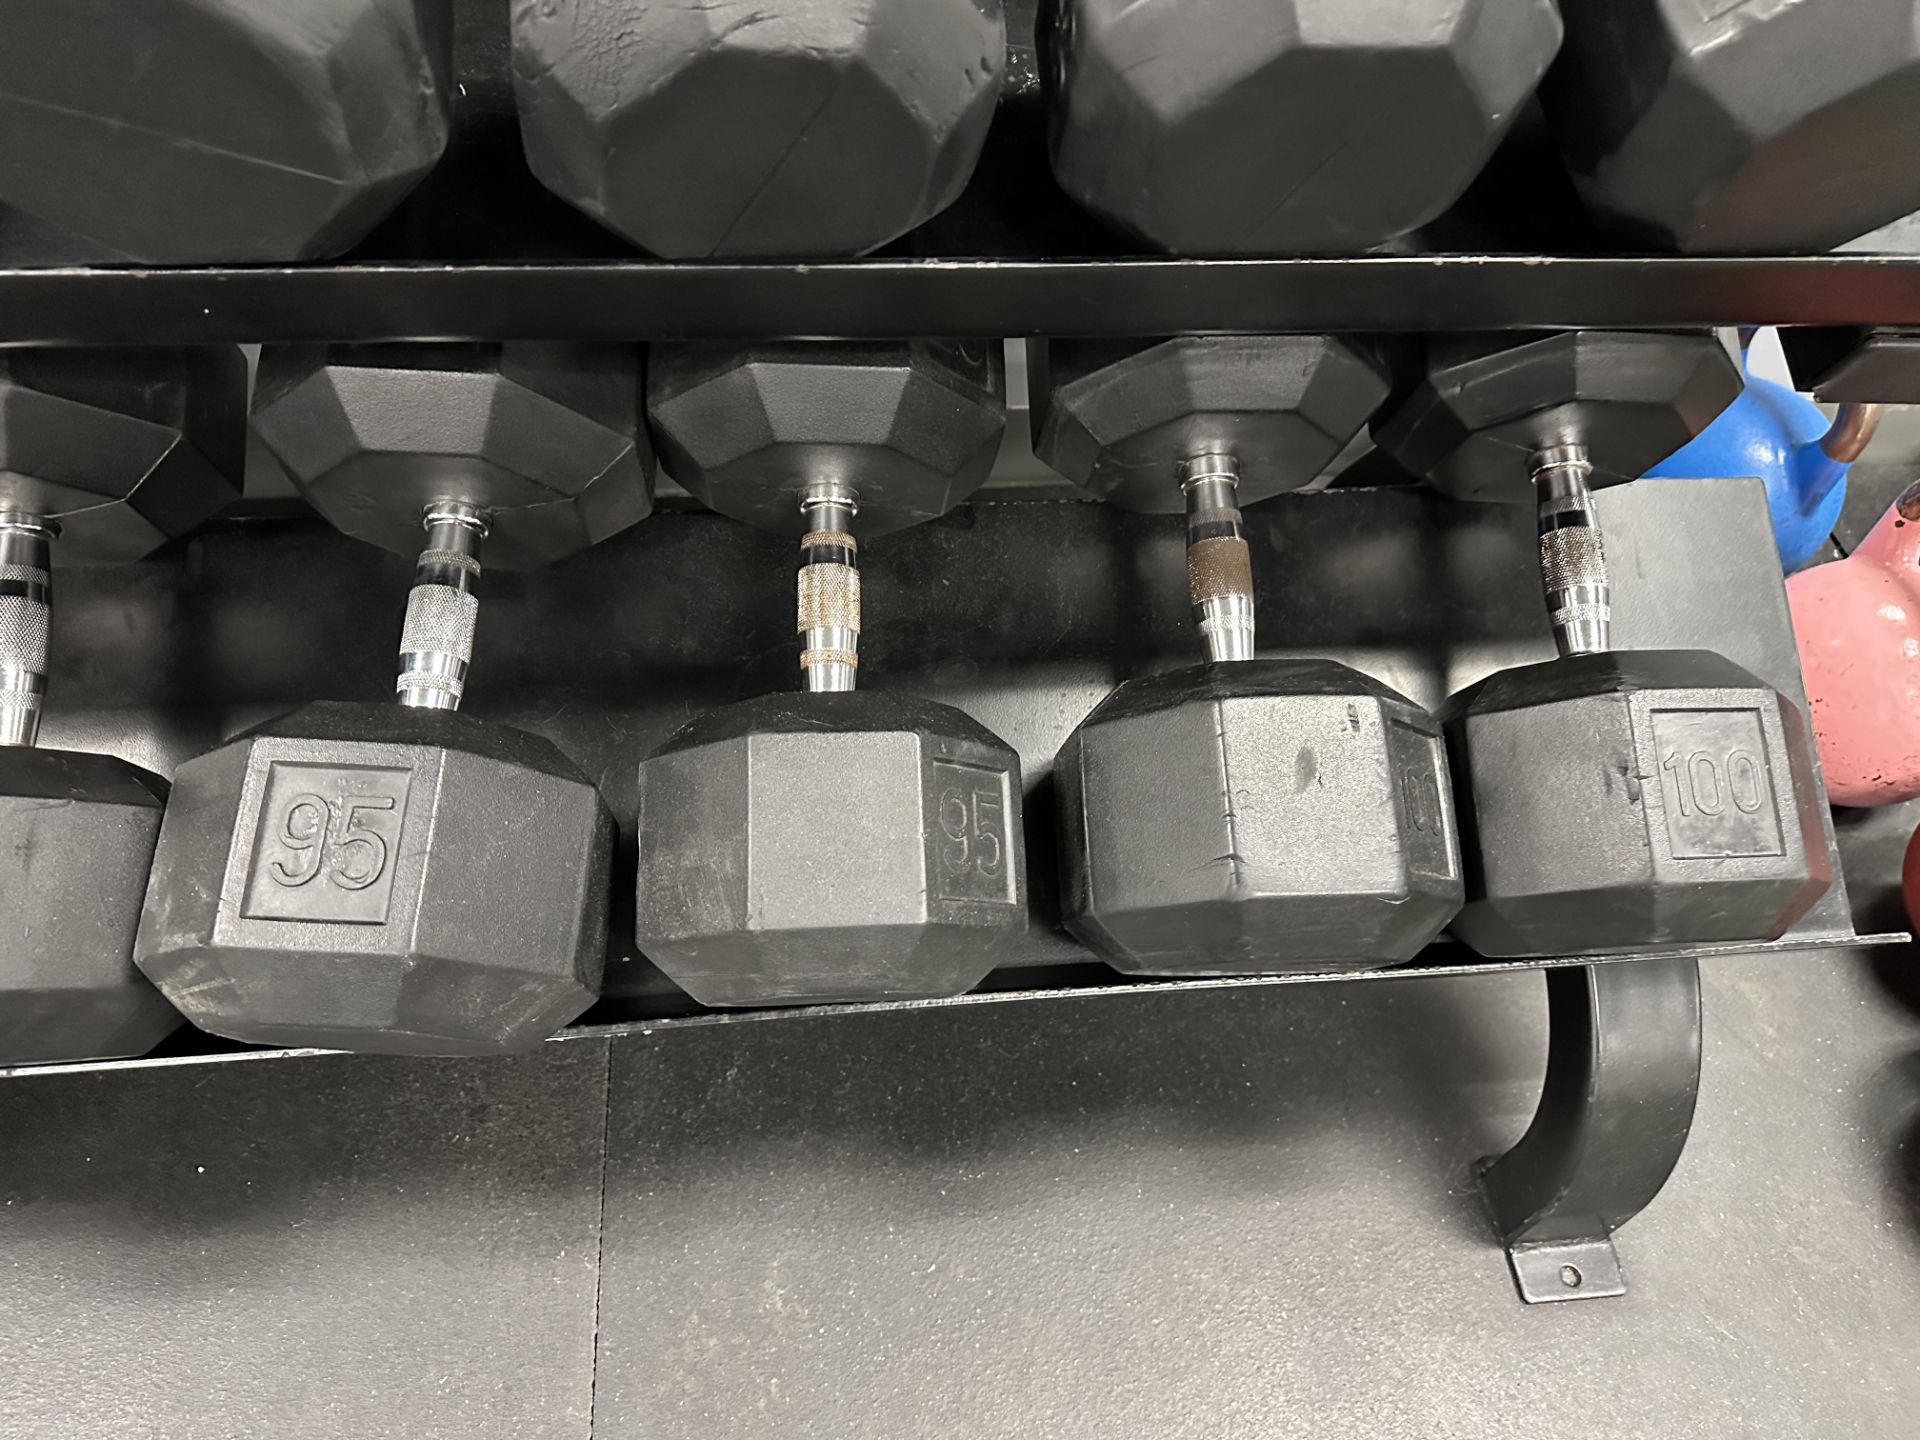 Full Set of Dumbbells Between 5 Lbs. - 100Lbs in 5 Lb. Increments (Excluding 50 Lb. And Adding Pairs - Image 3 of 4